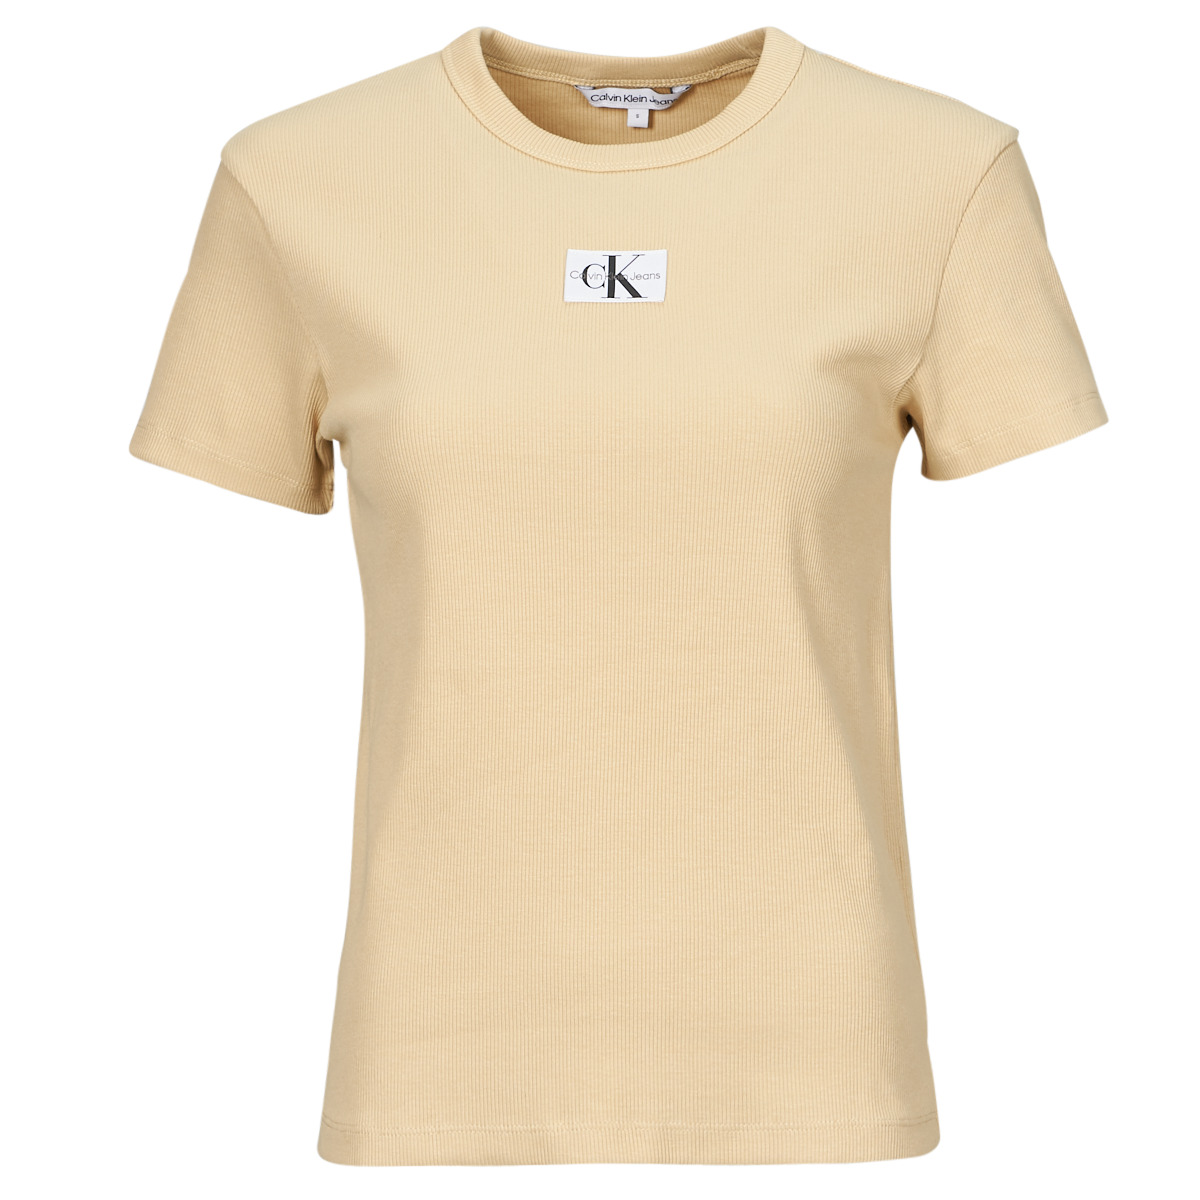 Women ! Europe delivery Clothing Klein WOVEN Beige | - TEE 44,00 - Jeans short-sleeved LABEL t-shirts Spartoo REGULAR € Fast RIB Calvin